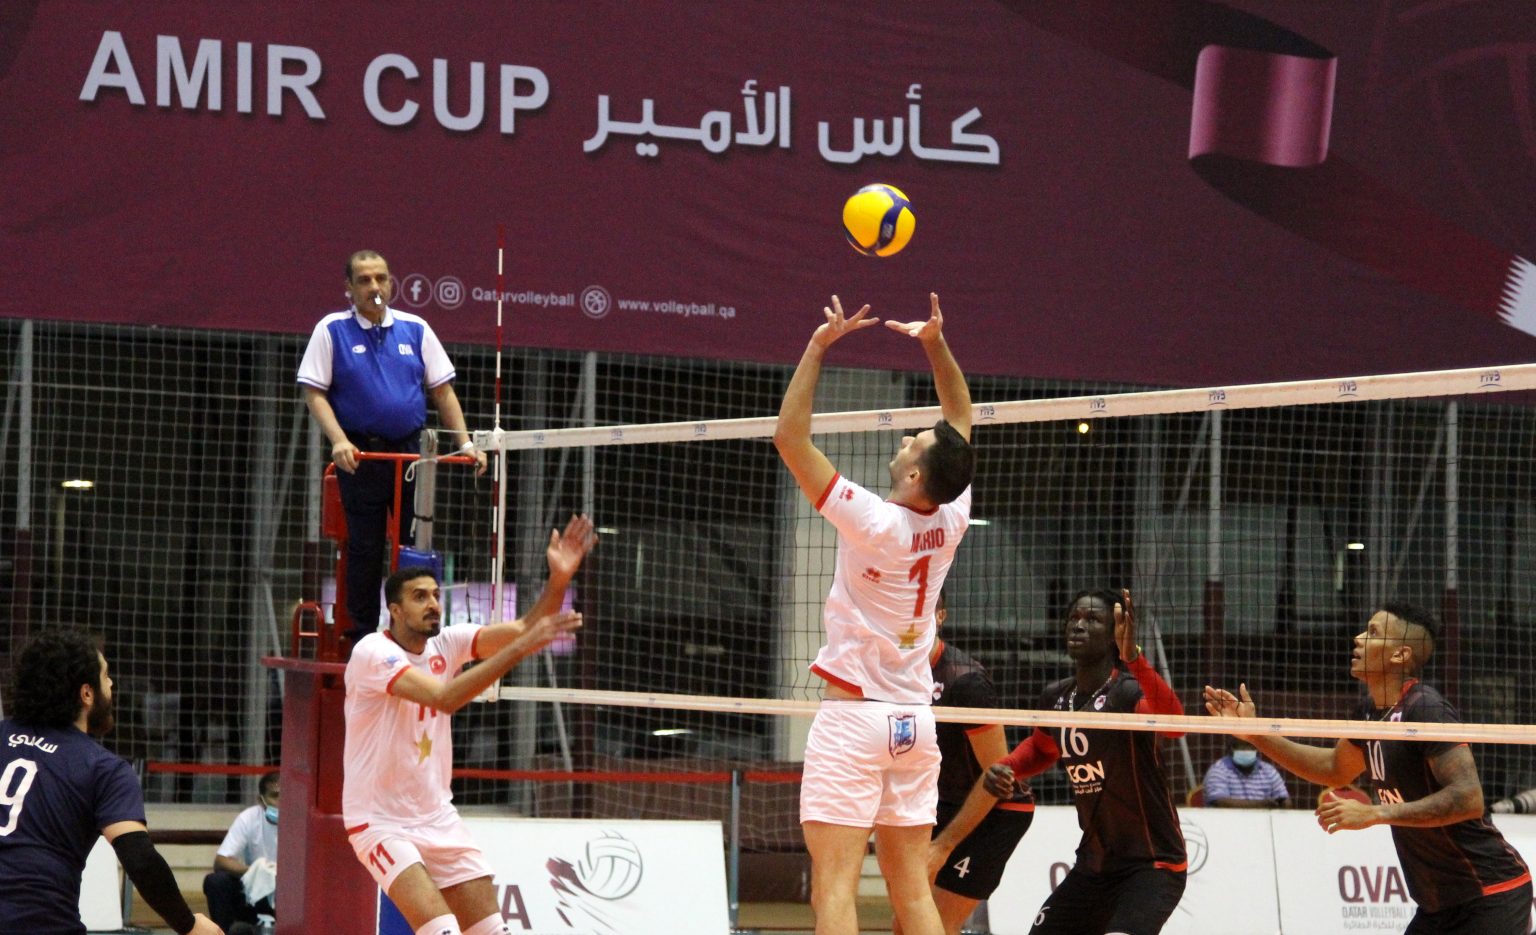 AL-ARABI PREVAIL OVER AL-RAYYAN TO SET UP AMIR CUP FINAL CLASH WITH POLICE